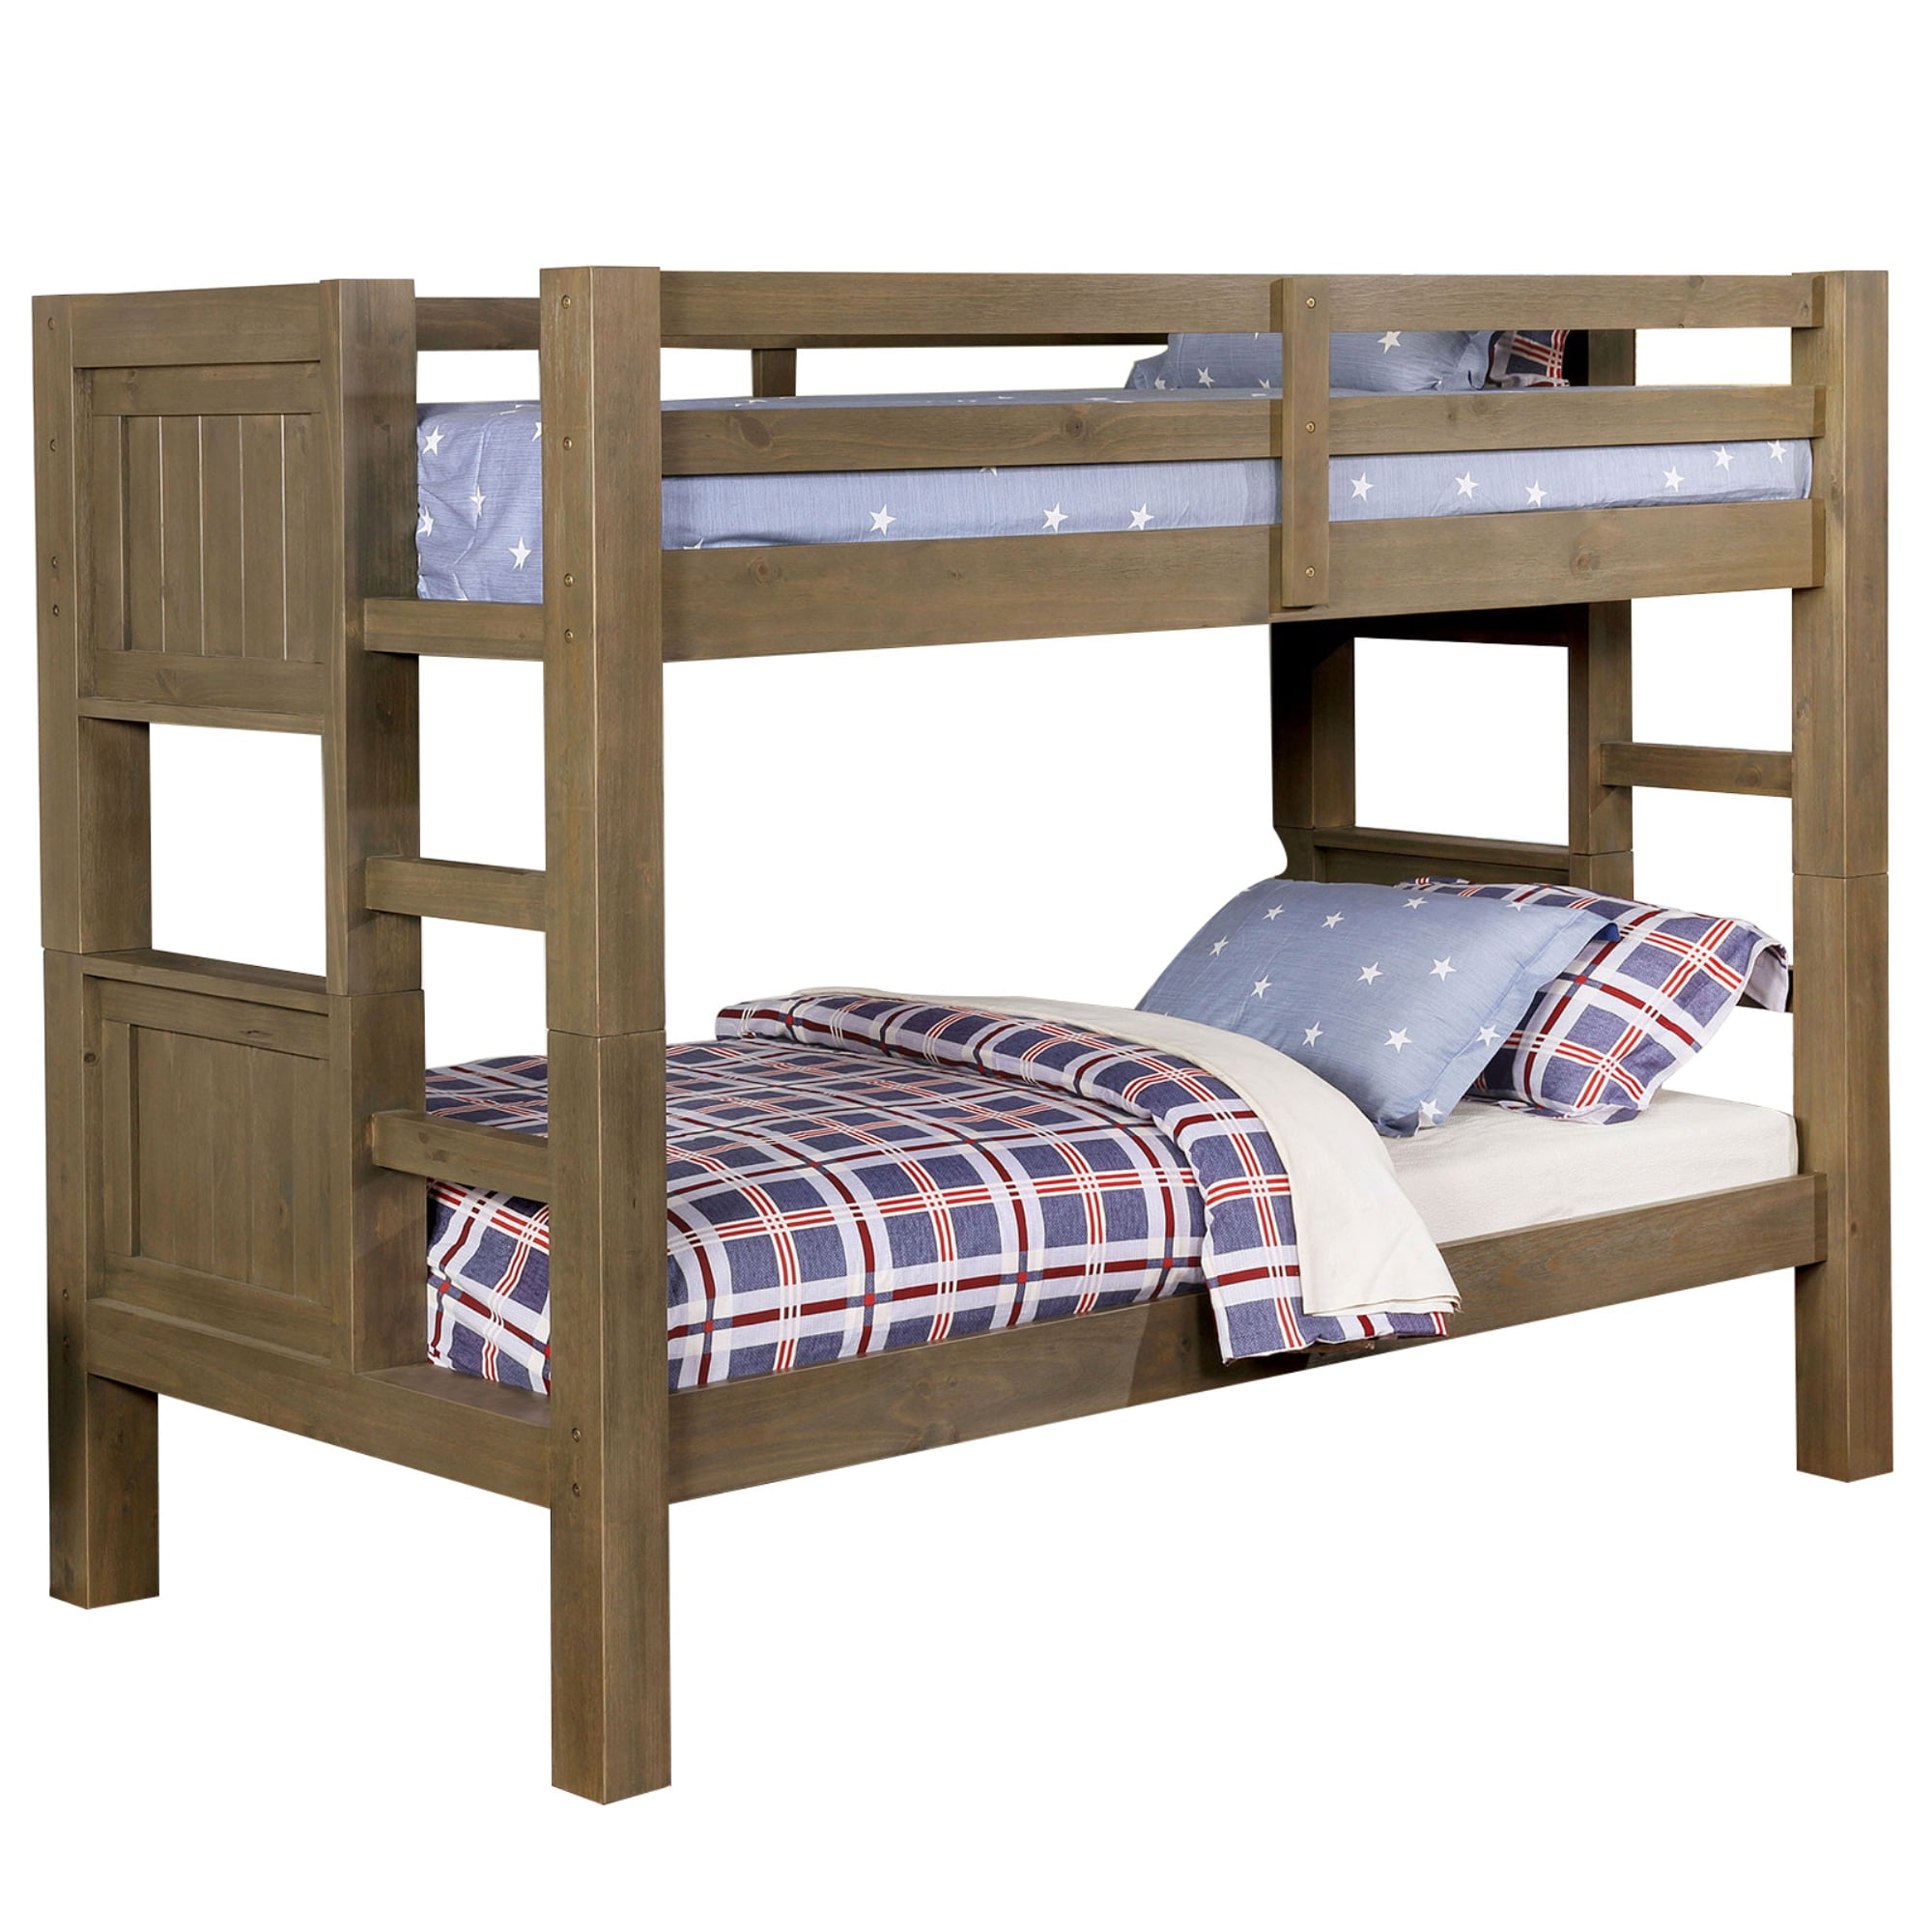 Rustic Style Wooden Bunk Bed With Built, Bunk Bed Blocker